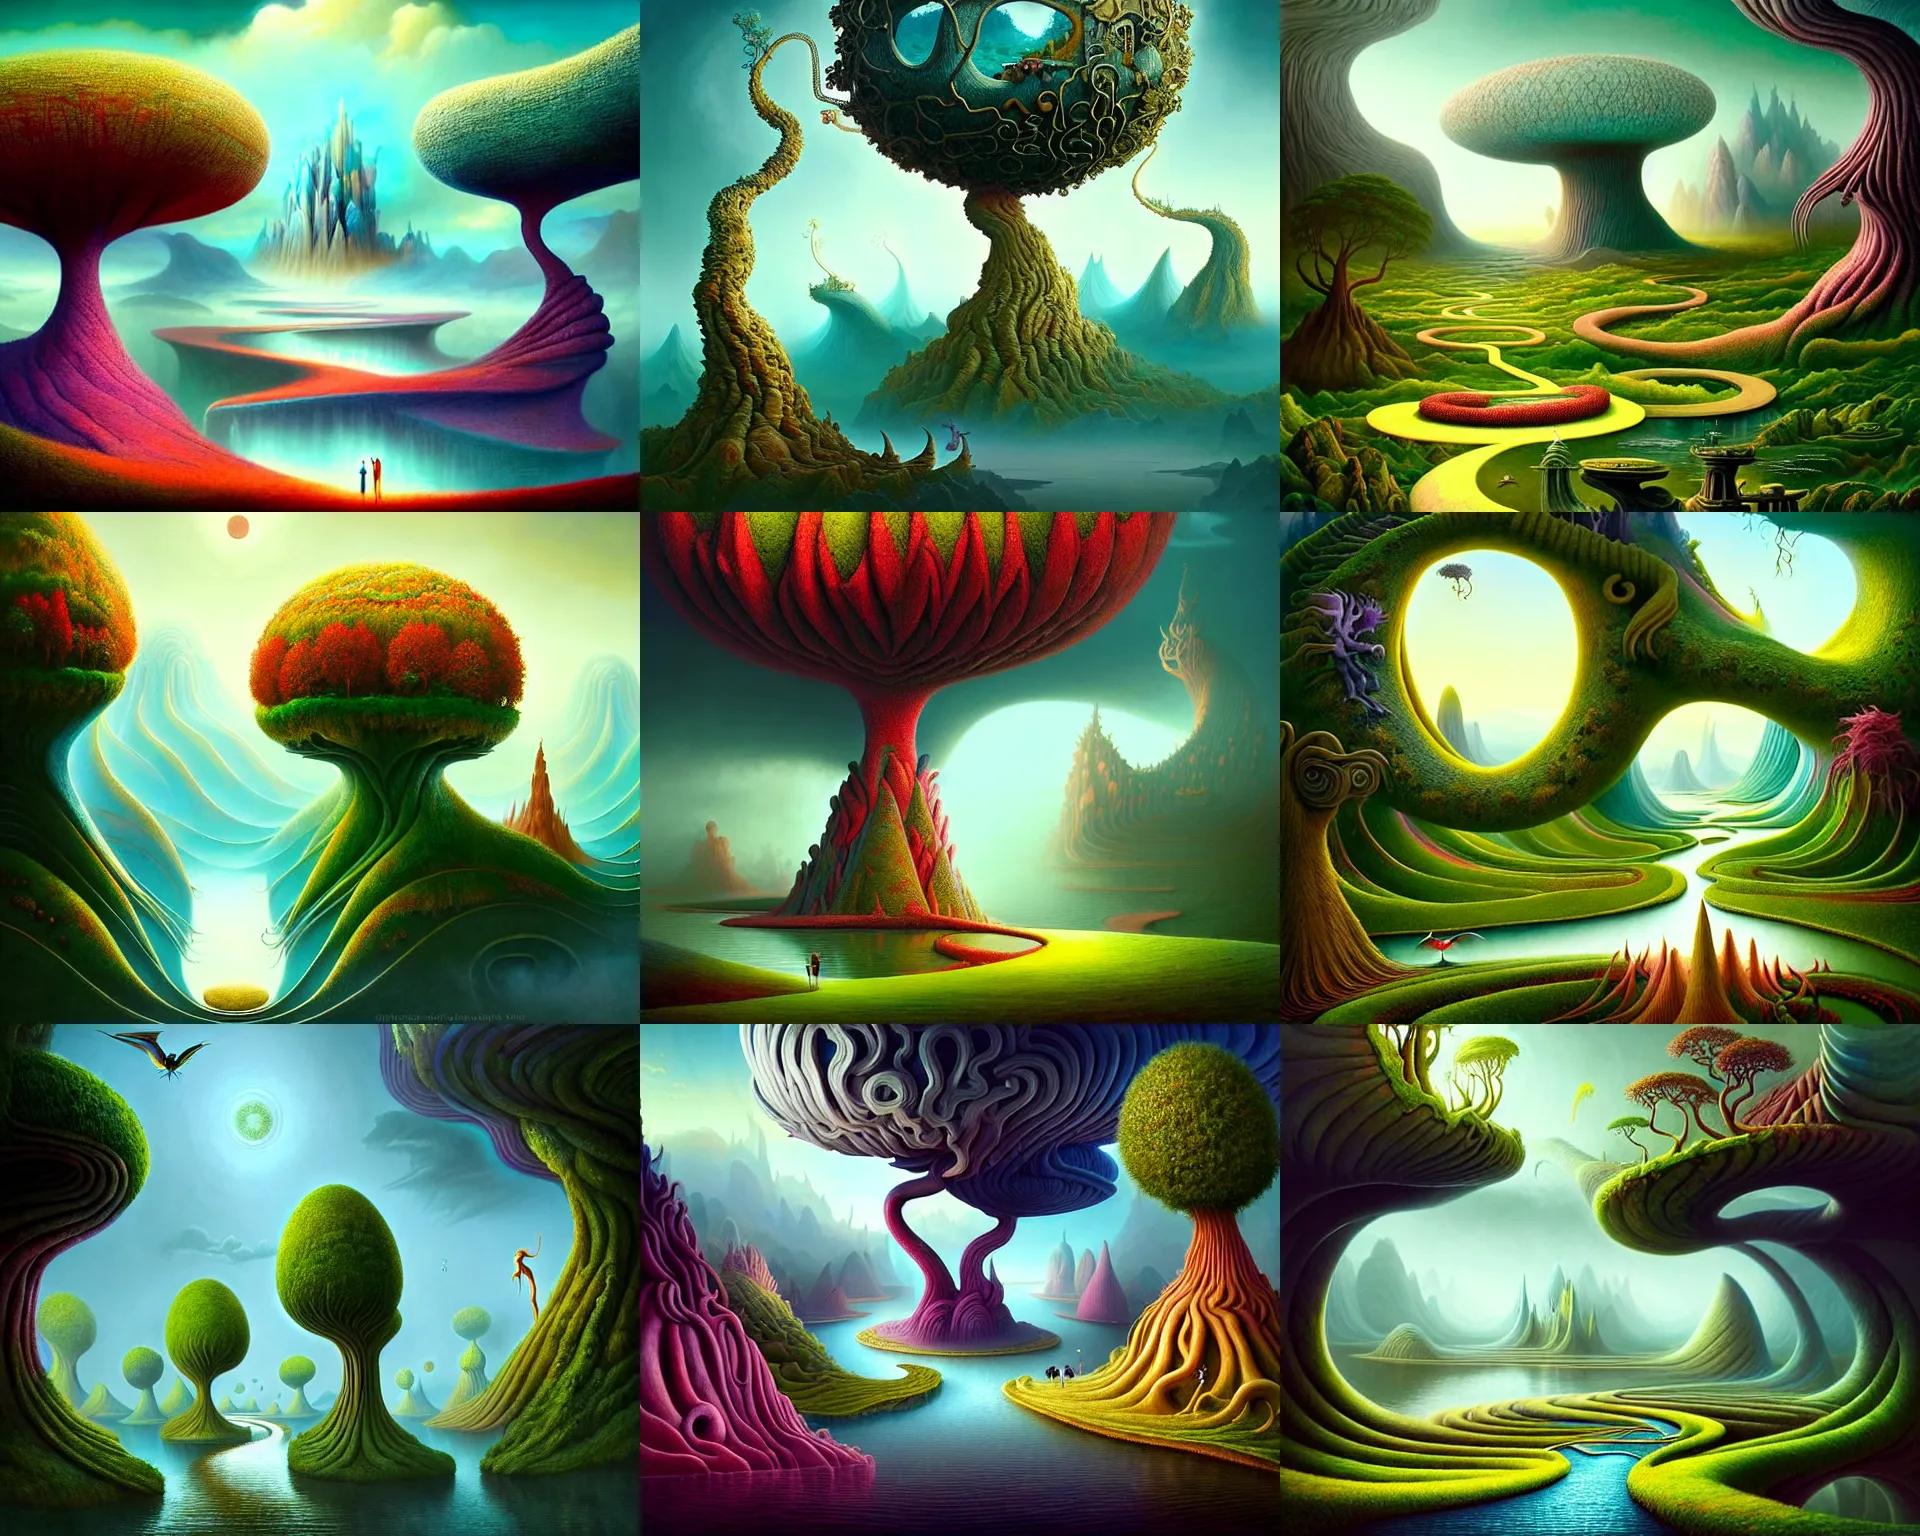 Prompt: a beguiling epic stunning beautiful and insanely detailed matte painting of the impossible winding path through imaginary worlds with surreal architecture designed by Heironymous Bosch, mega structures inspired by Heironymous Bosch's Garden of Earthly Delights, vast surreal landscape and horizon by Asher Durand and Cyril Rolando and Natalie Shau, colorful otherworldly trees, masterpiece!!!, grand!, imaginative!!!, whimsical!!, otherworldly, epic scale, intricate details, sense of awe, elite, wonder, insanely complex, masterful composition!!!, sharp focus, fantasy realism, dramatic lighting